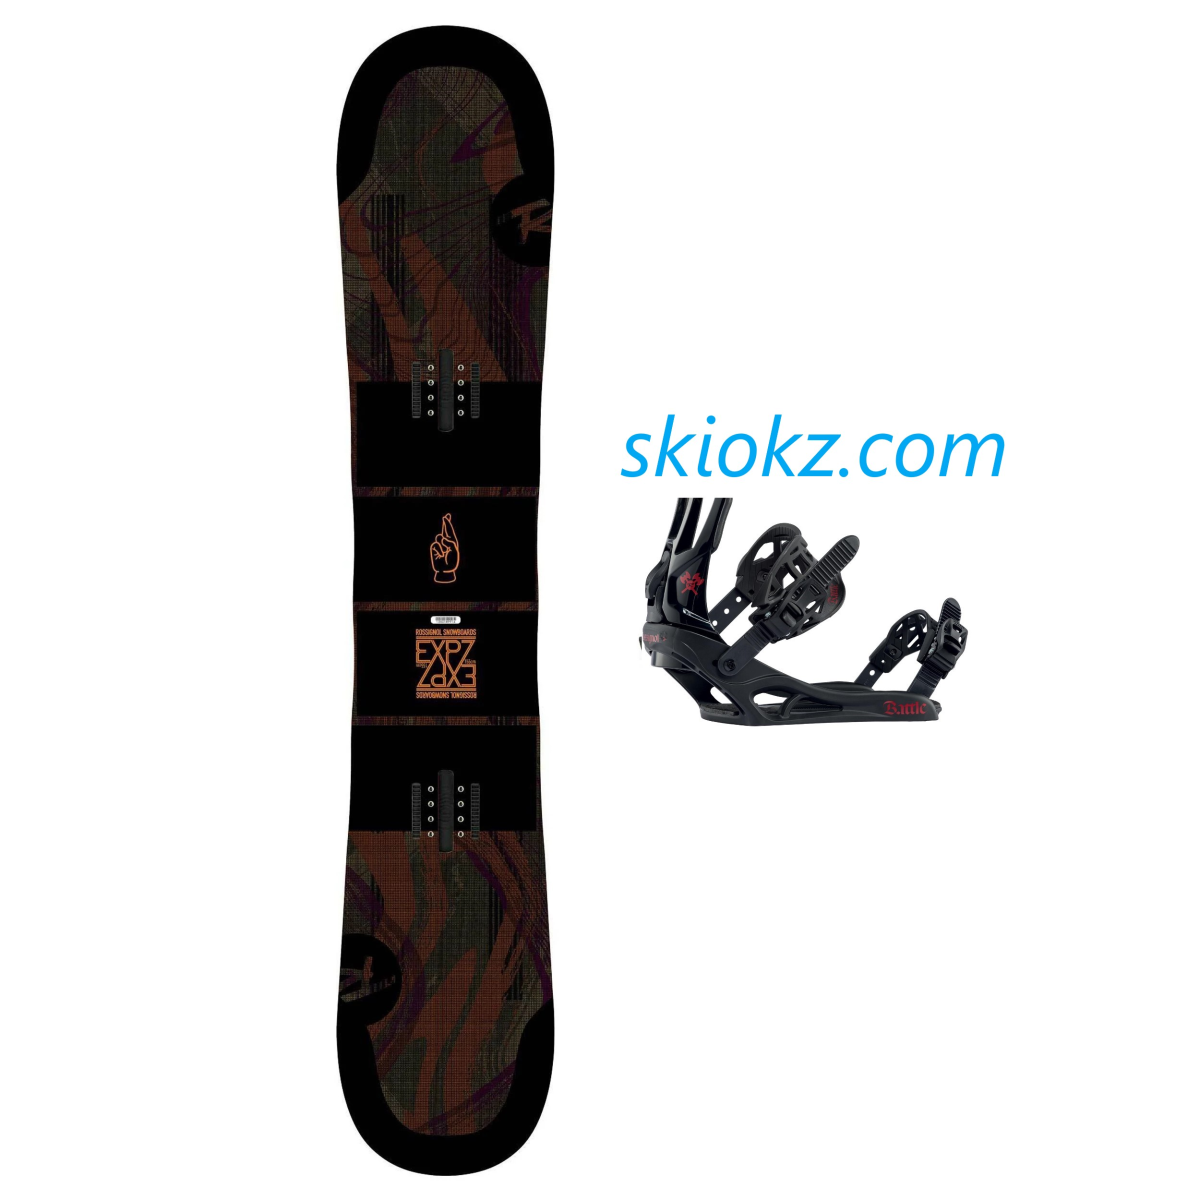 PACK SNOWBOARD NEUF ROSSIGNOL EXP7 (JIBSAW) 2020 + FIXATION ROSSIGNOL 2020